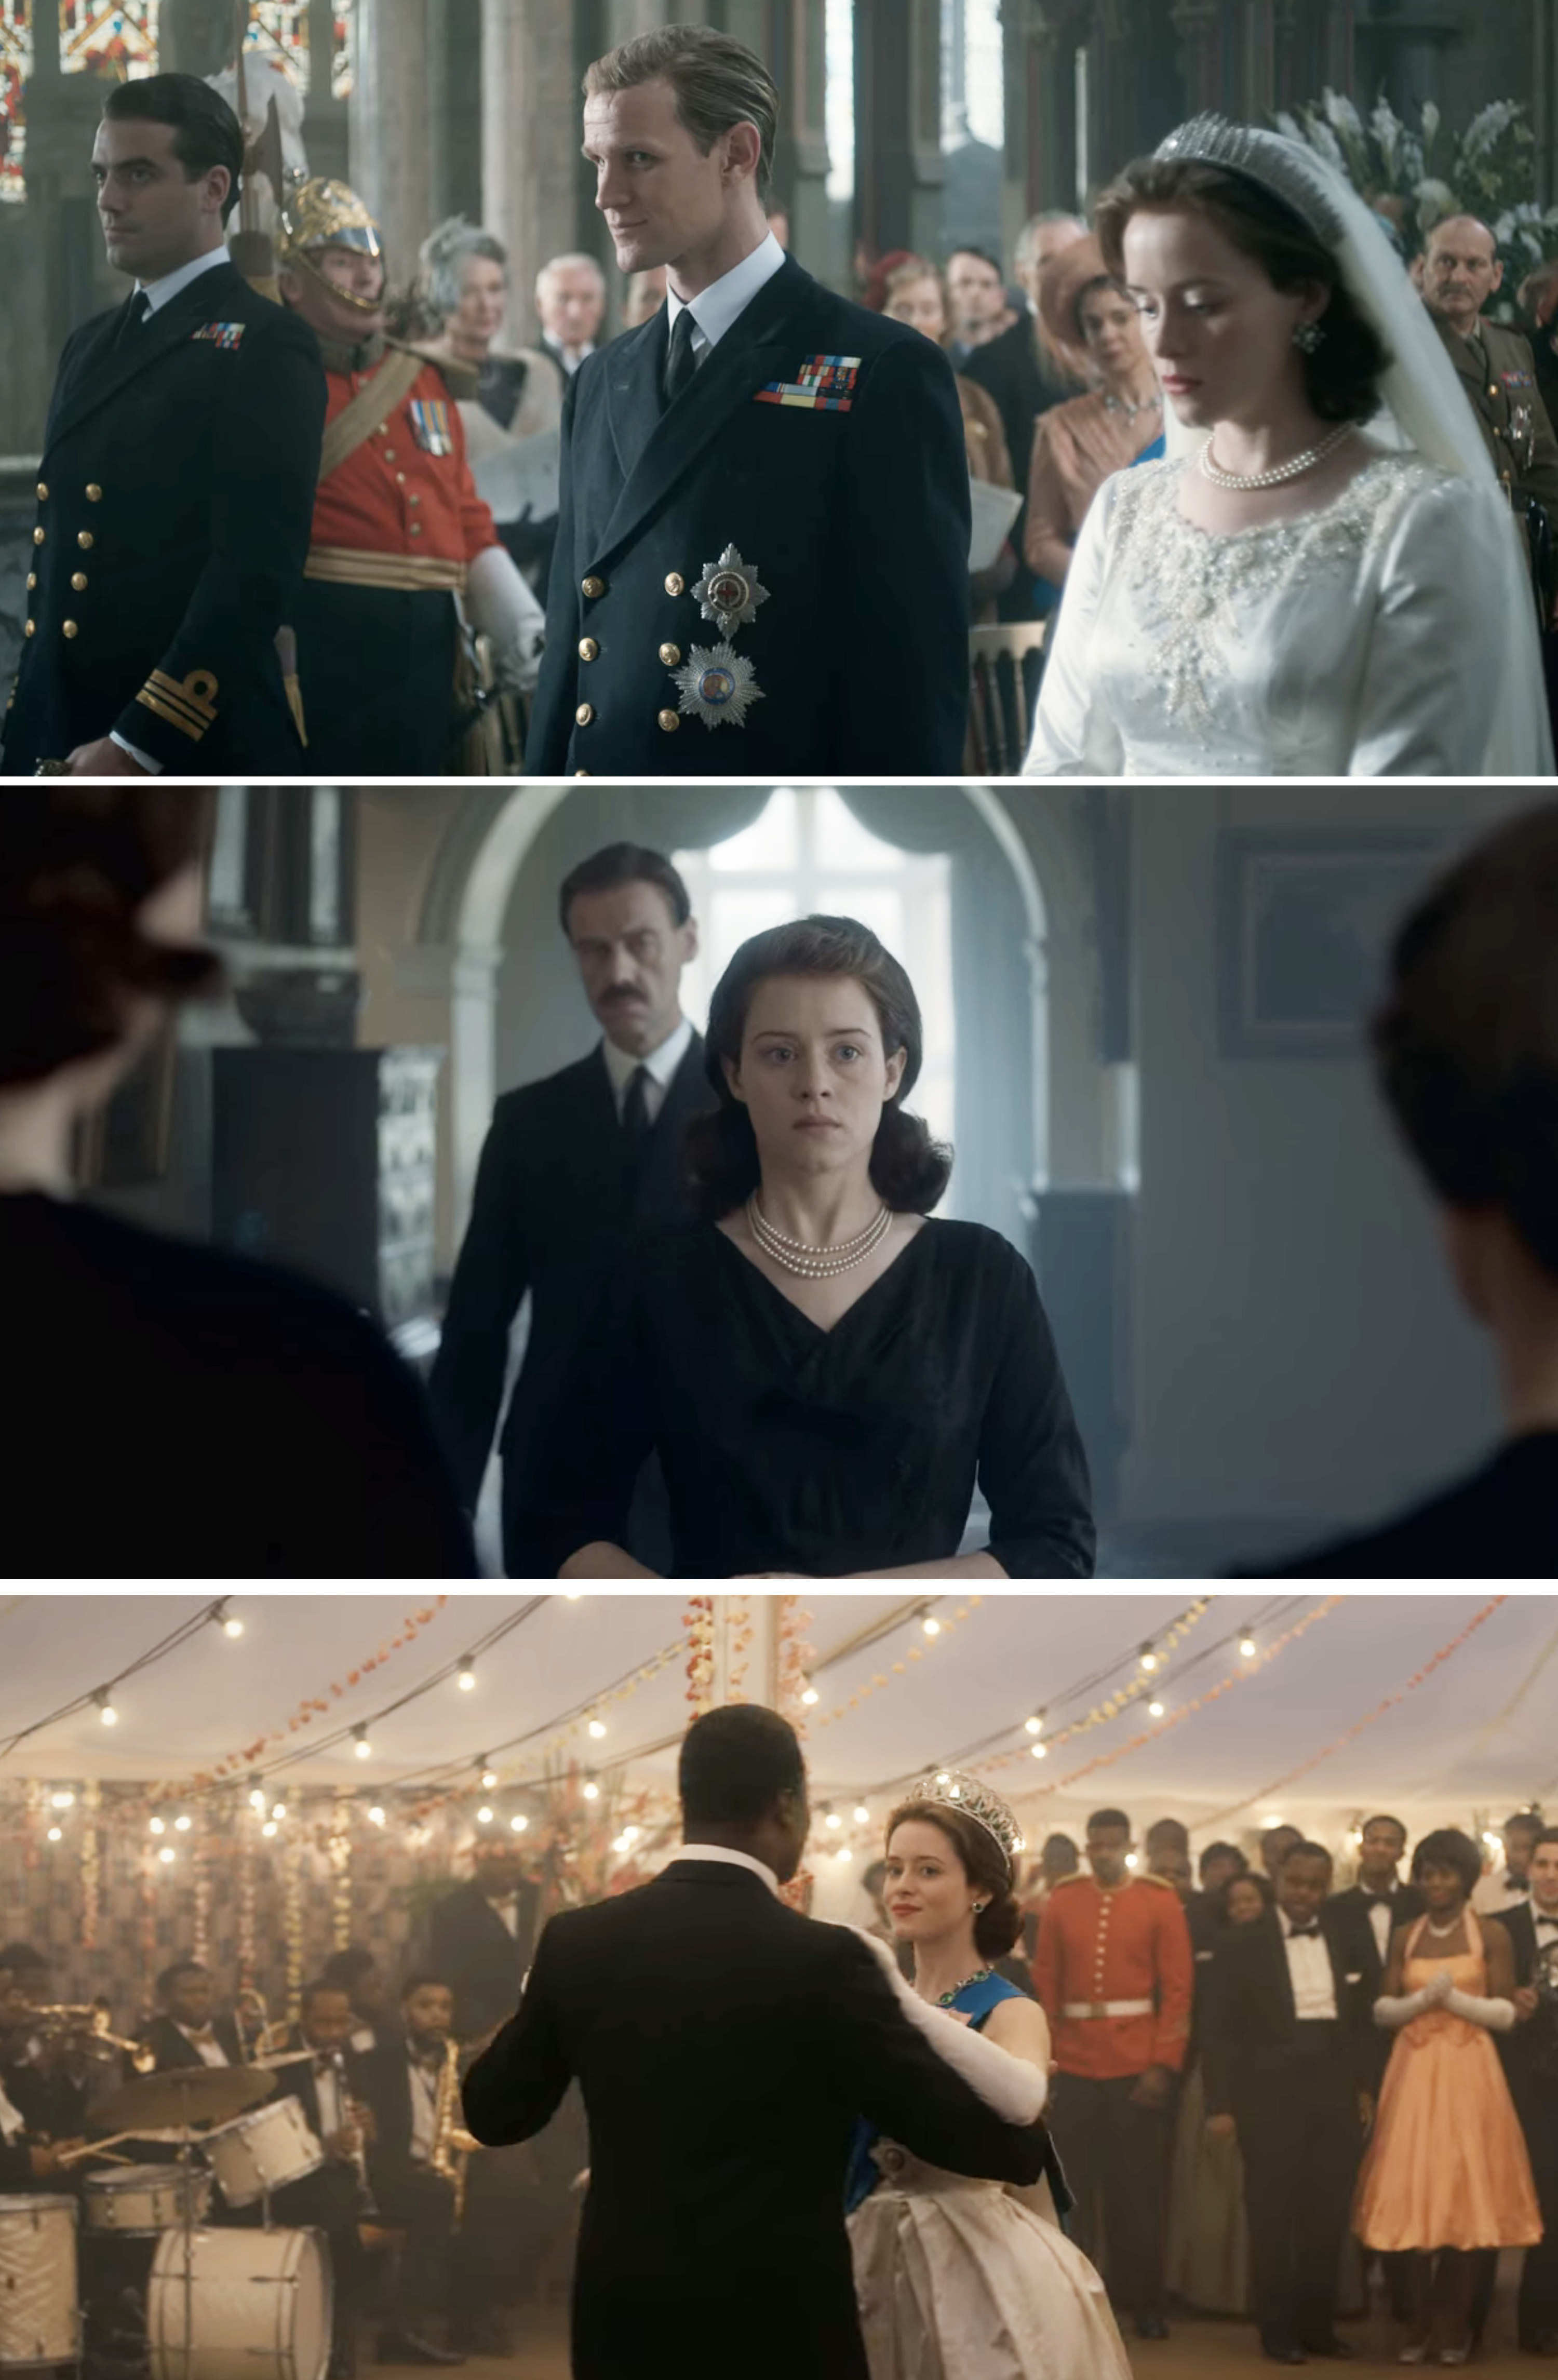 Scenes from The Crown